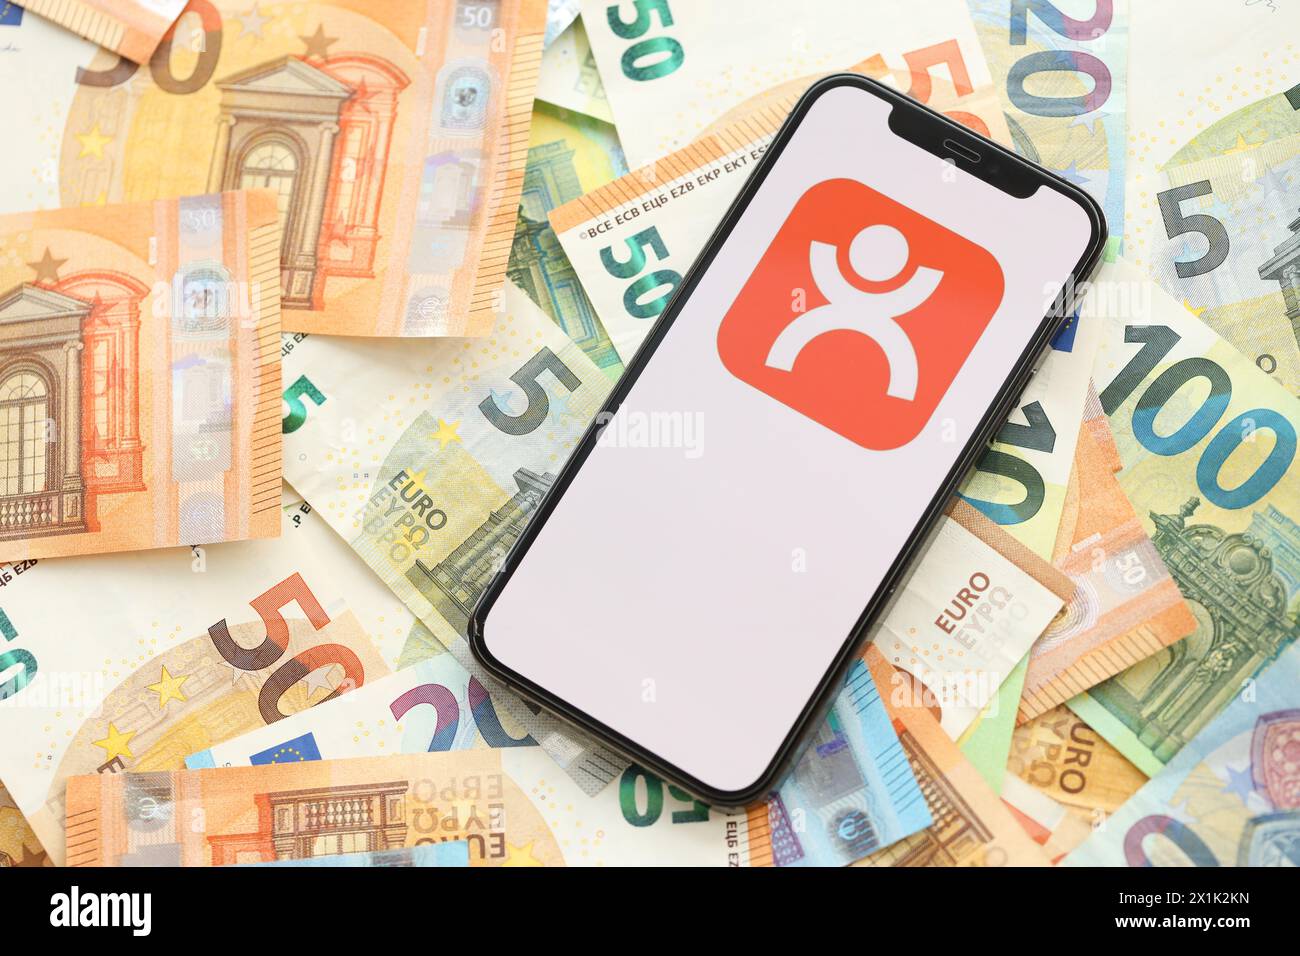 KYIV, UKRAINE - APRIL 1, 2024 Dianping platform icon on smartphone screen on many euro money bills. iPhone display with app logo with european currency euro banknotes Stock Photo